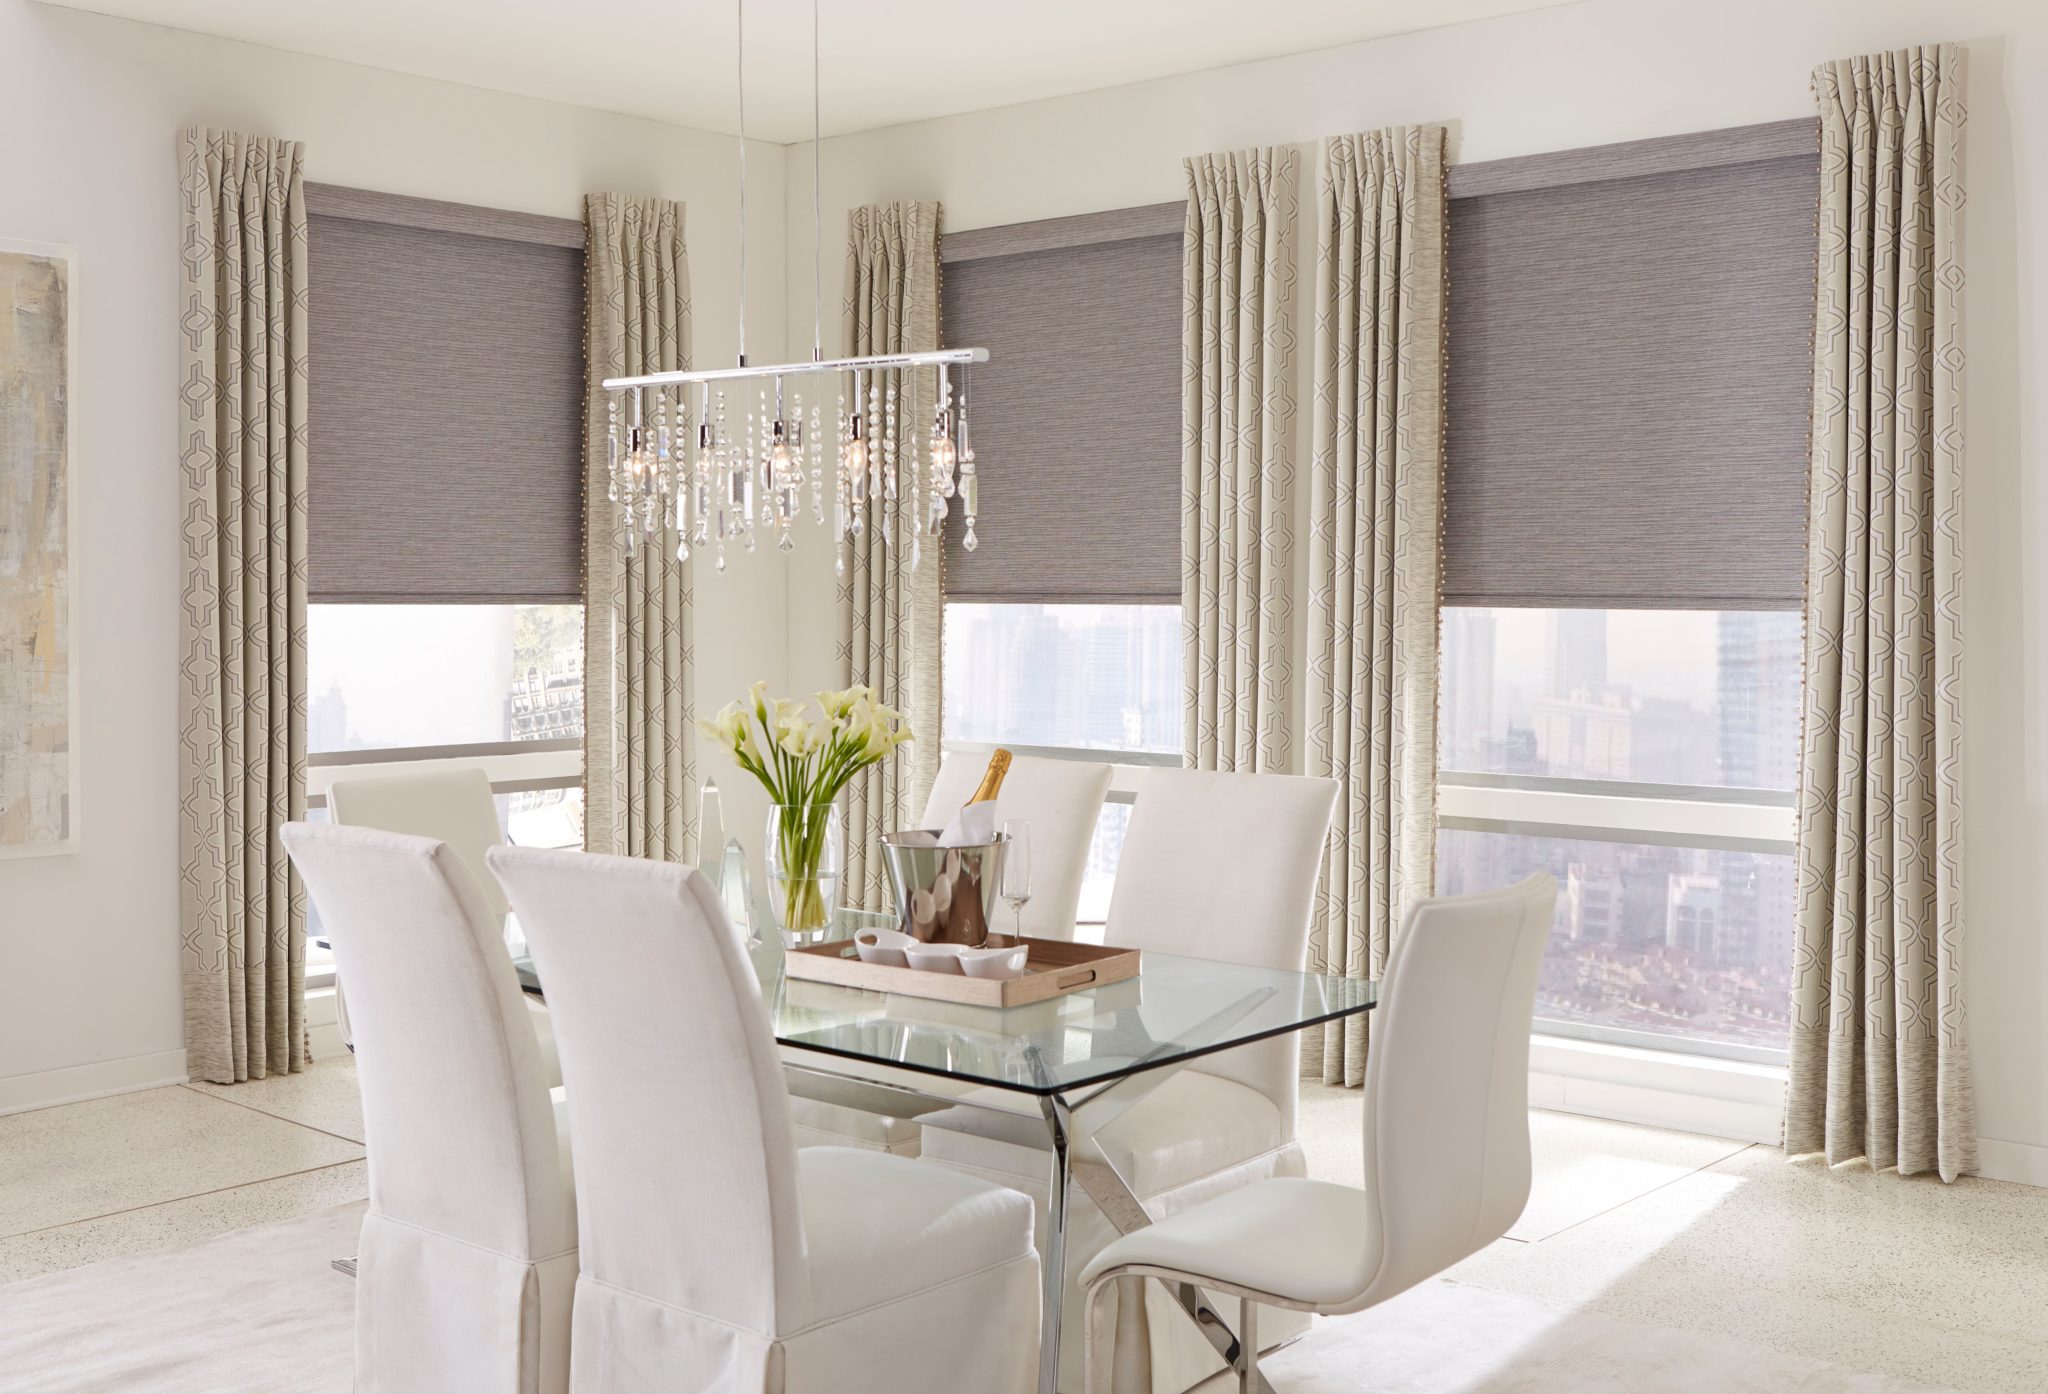 Decorating with Window Treatments